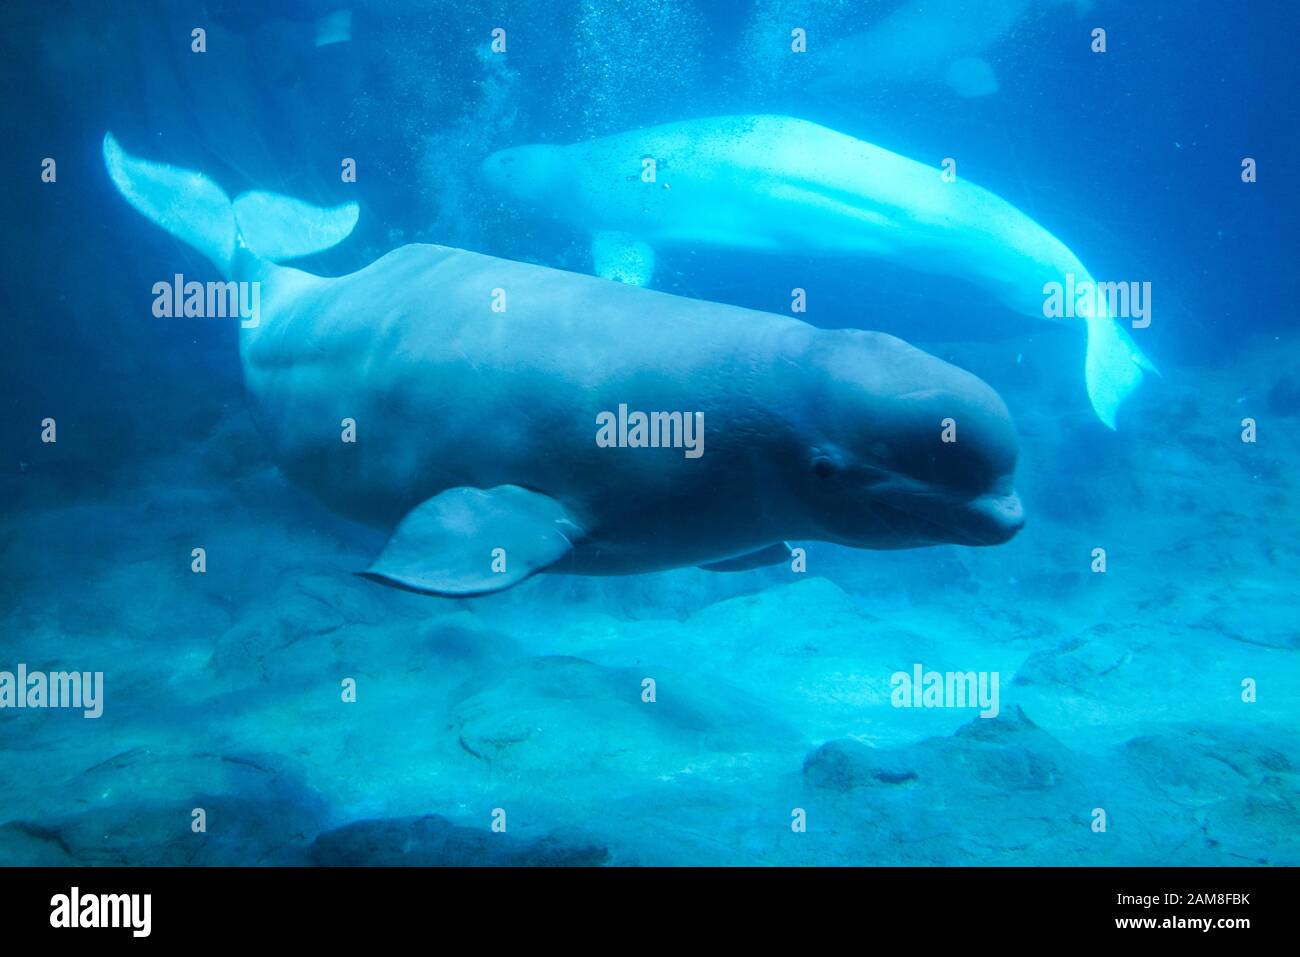 Zhuhai, China, November, 2018. The beluga whales in the aquarium. The beluga whale is an Arctic and sub-Arctic cetacean. It is one of two members of t Stock Photo